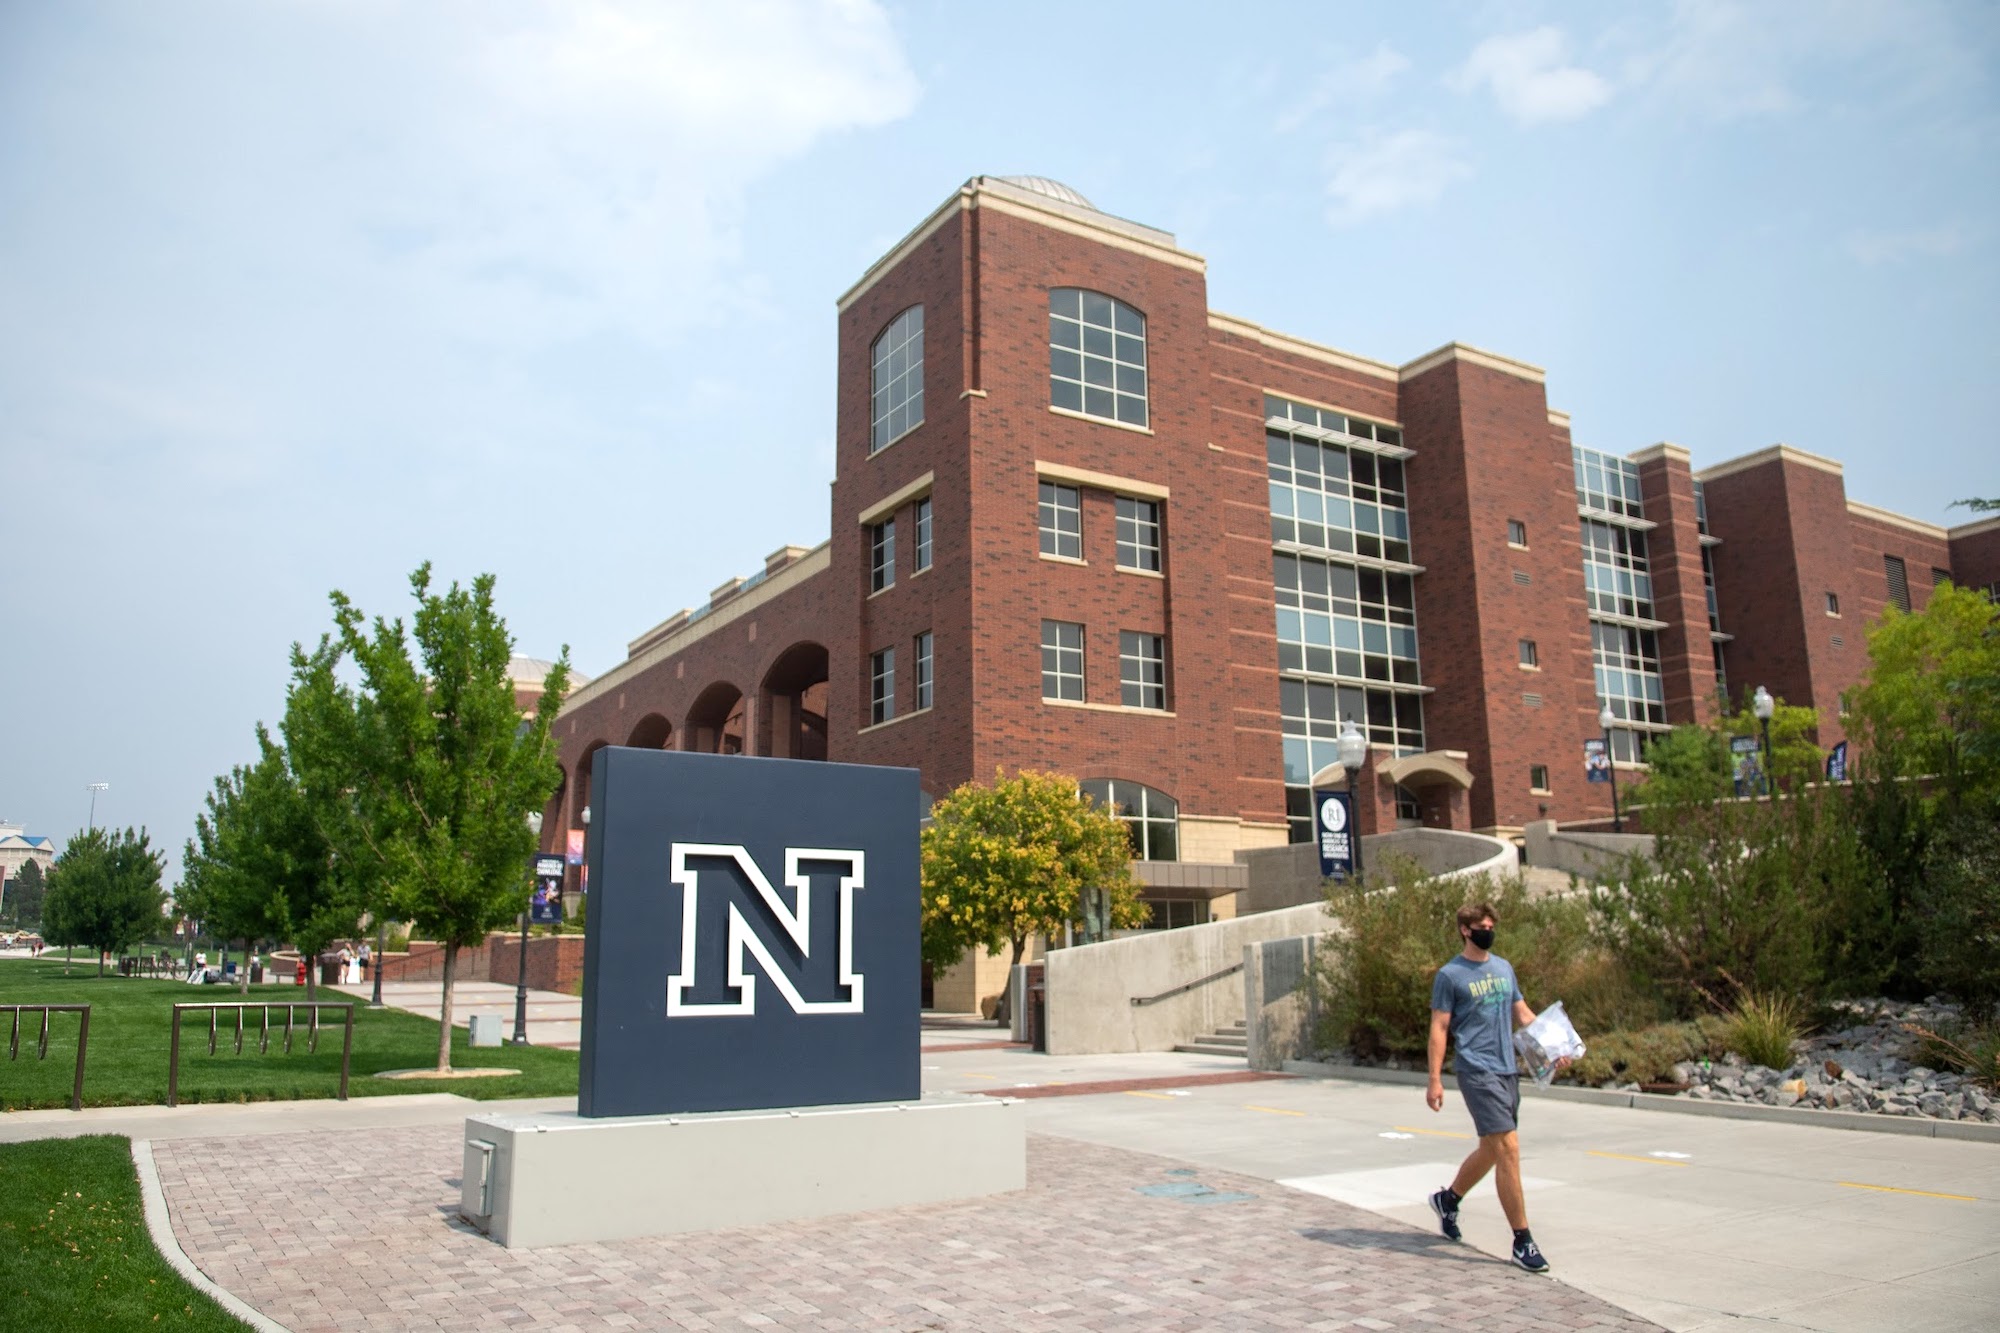 UNR set to expand campus southward Serving Carson City for over 150 years